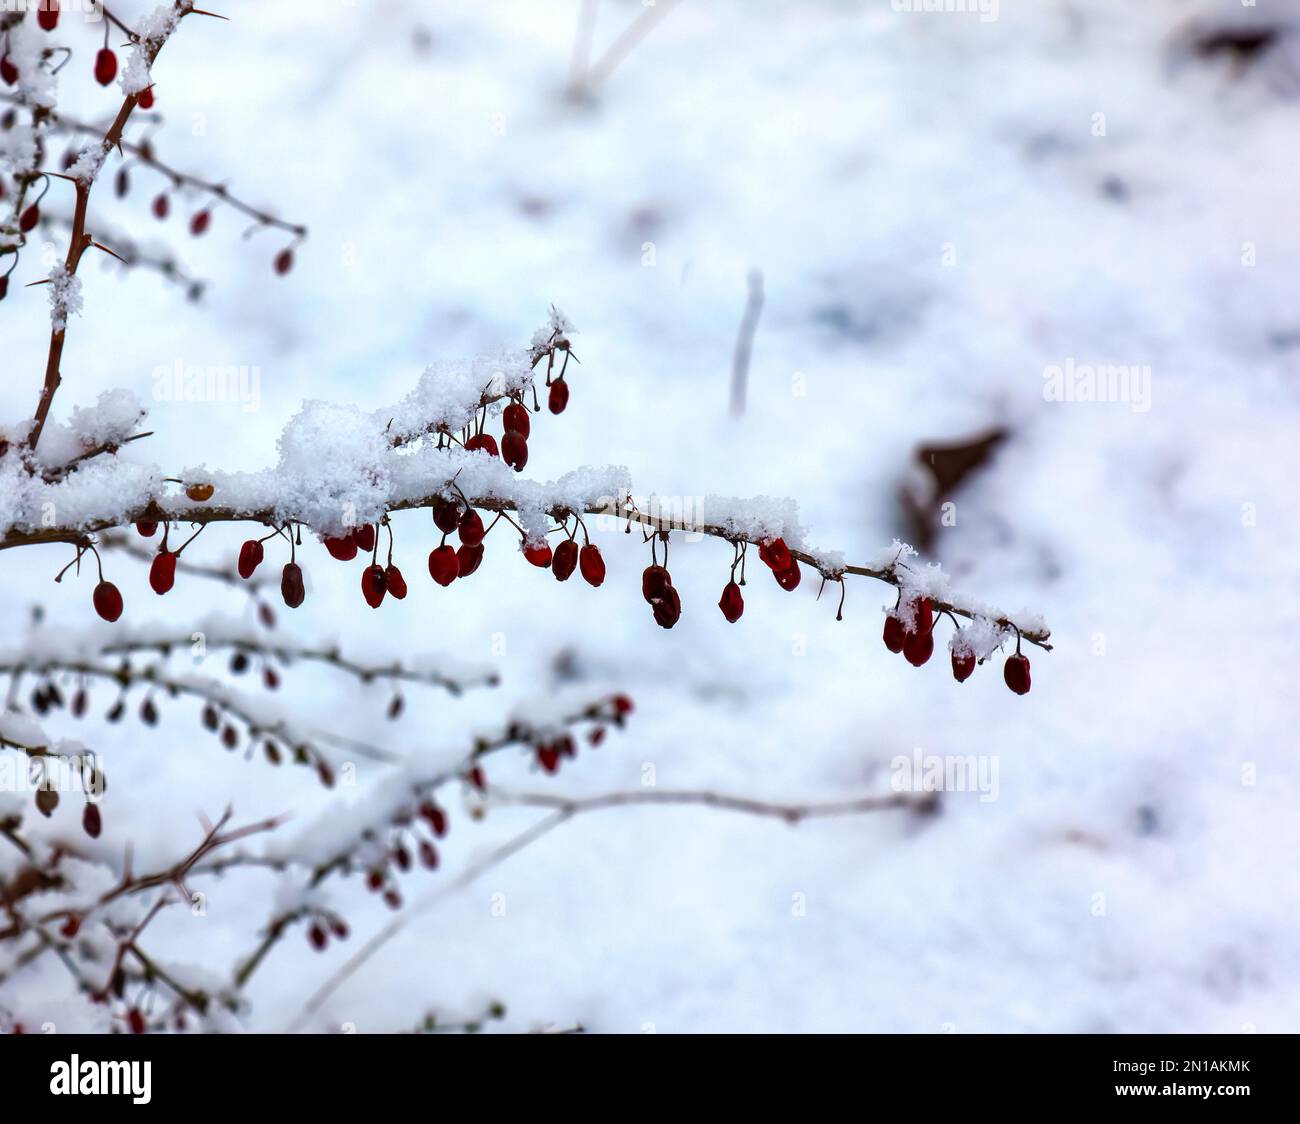 Branches of Berberis sibirica in winter with red ripe berries. After thawing, a little snow and droplets of frozen water remain on the berries and bra Stock Photo